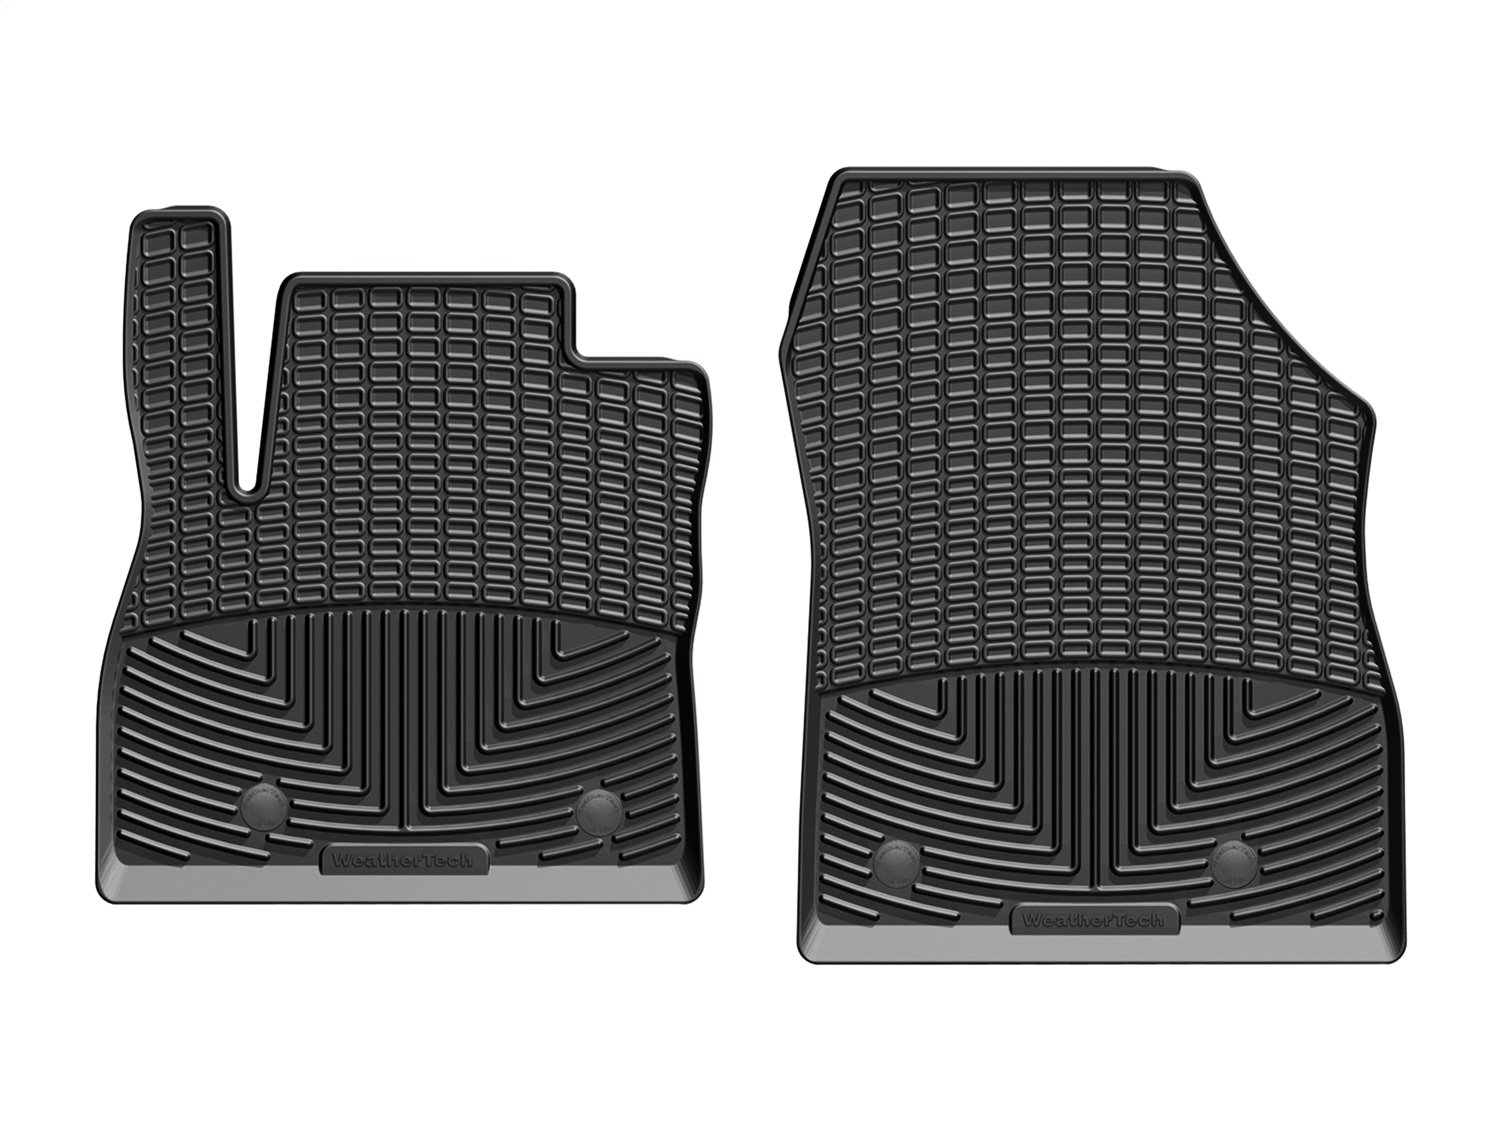 FRONT RUBBER MATS BLACK CHEVROLET CRUZE 2016-2017 FITS AUTOMATIC AND MANUAL TRANS